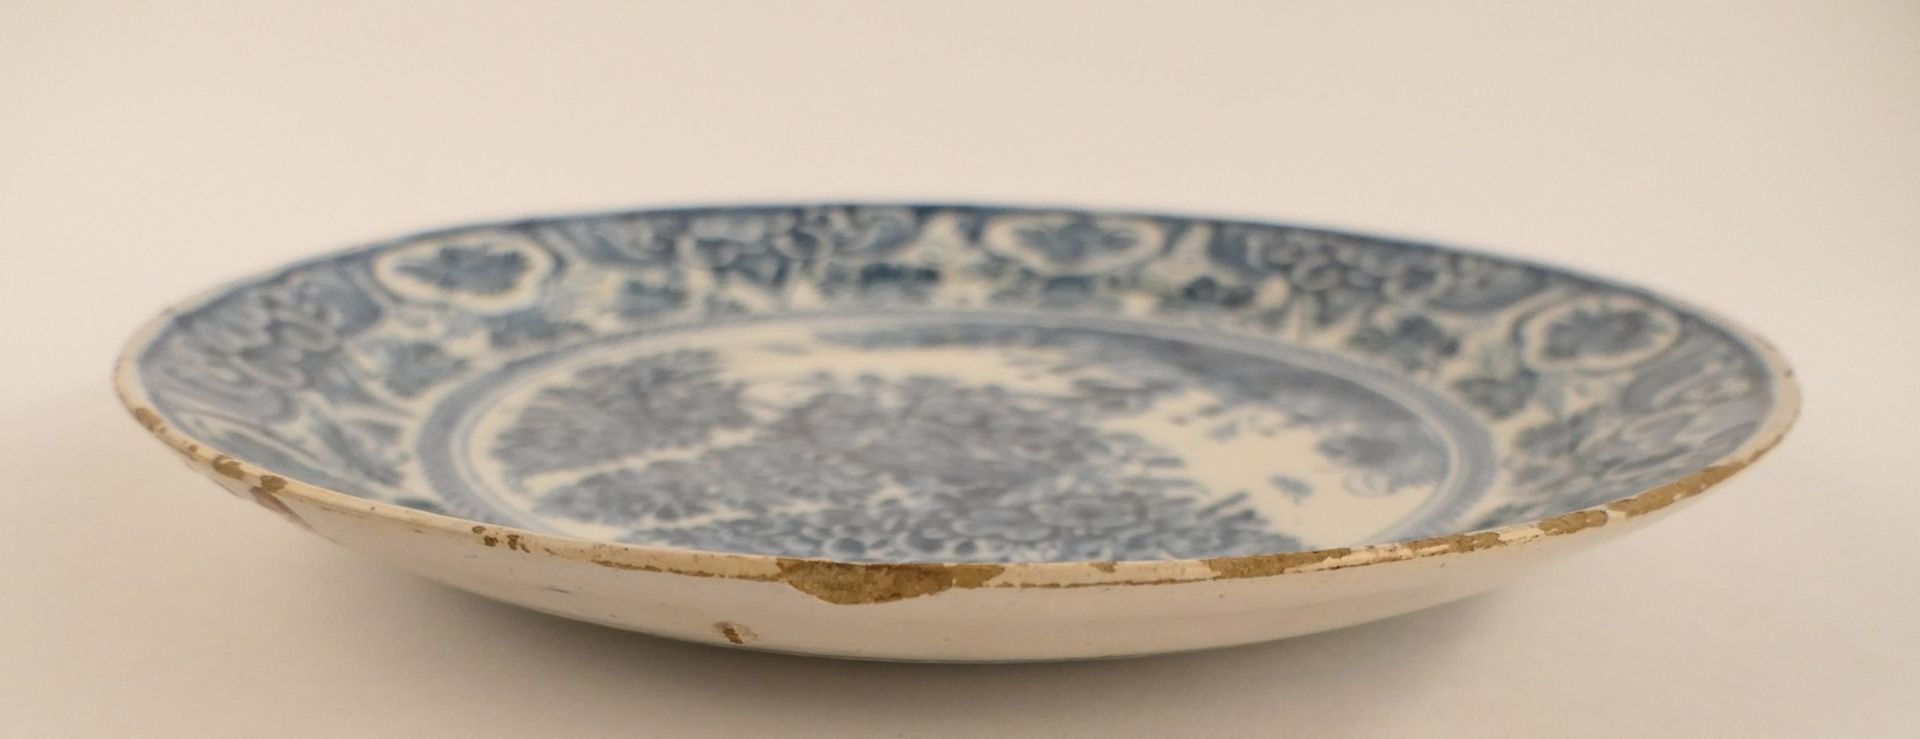 A blue and white 'theeboom' decorated Dutch Delftware plate, marked 'De Witte Starre', Diameter 28 - Image 8 of 9